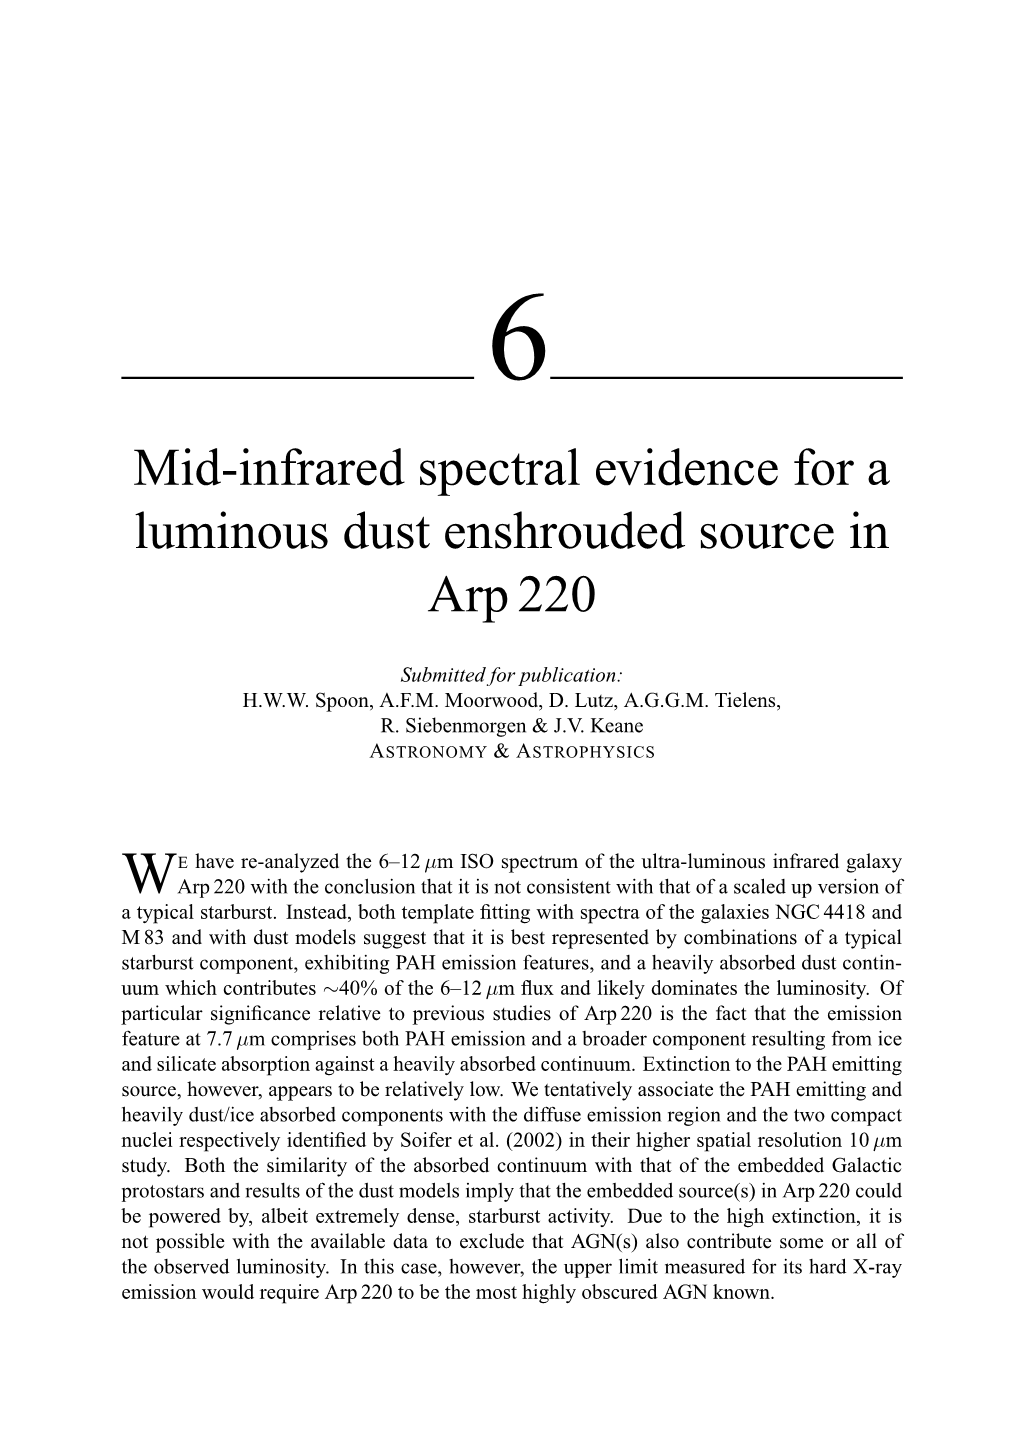 Mid-Infrared Spectral Evidence for a Luminous Dust Enshrouded Source in Arp 220